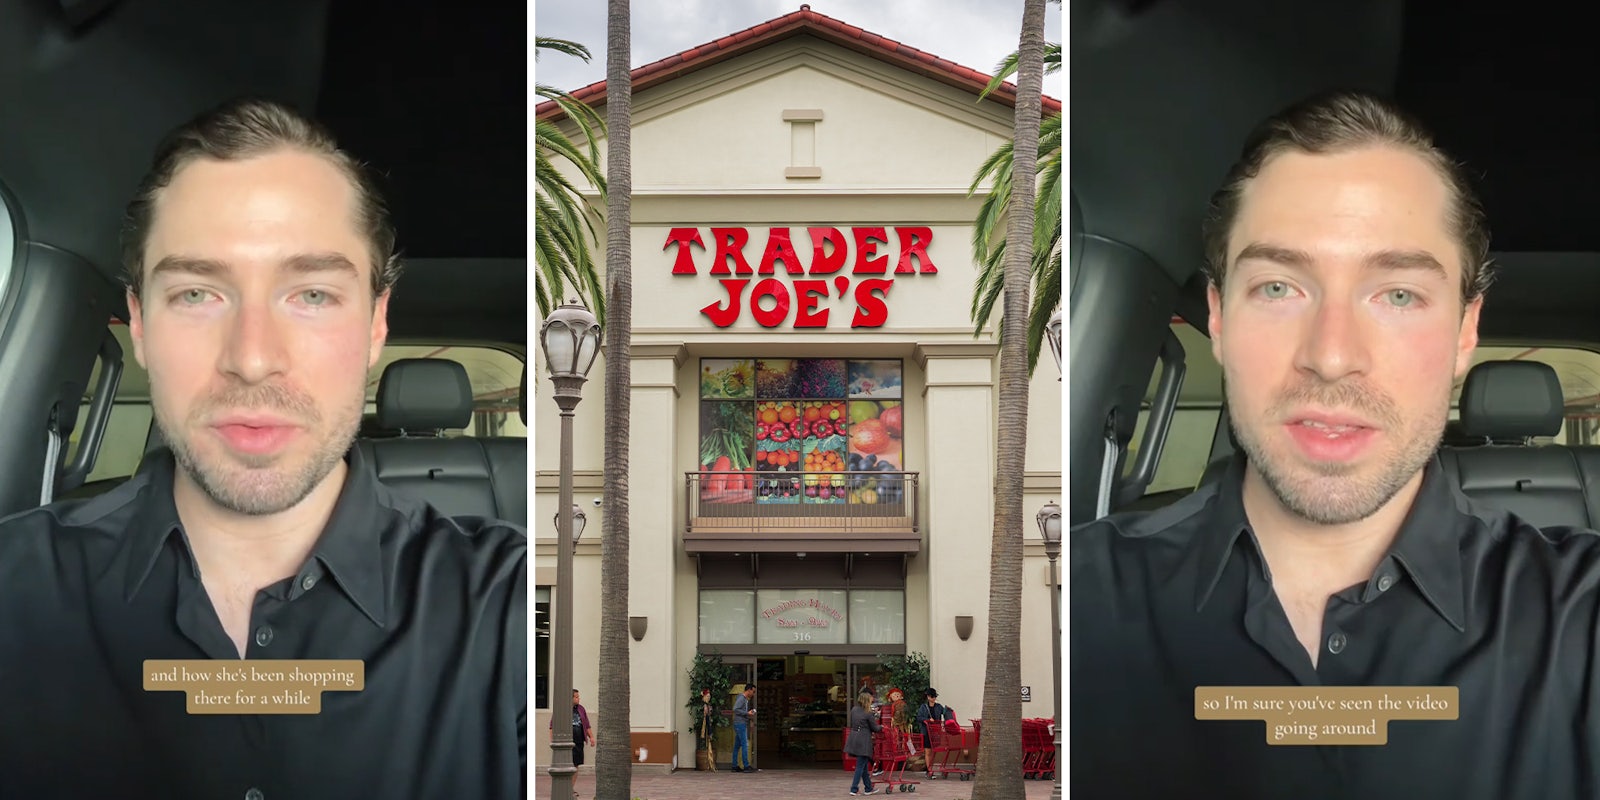 Customer says there’s now something ‘off’ with the grocery items at Trader Joe’s